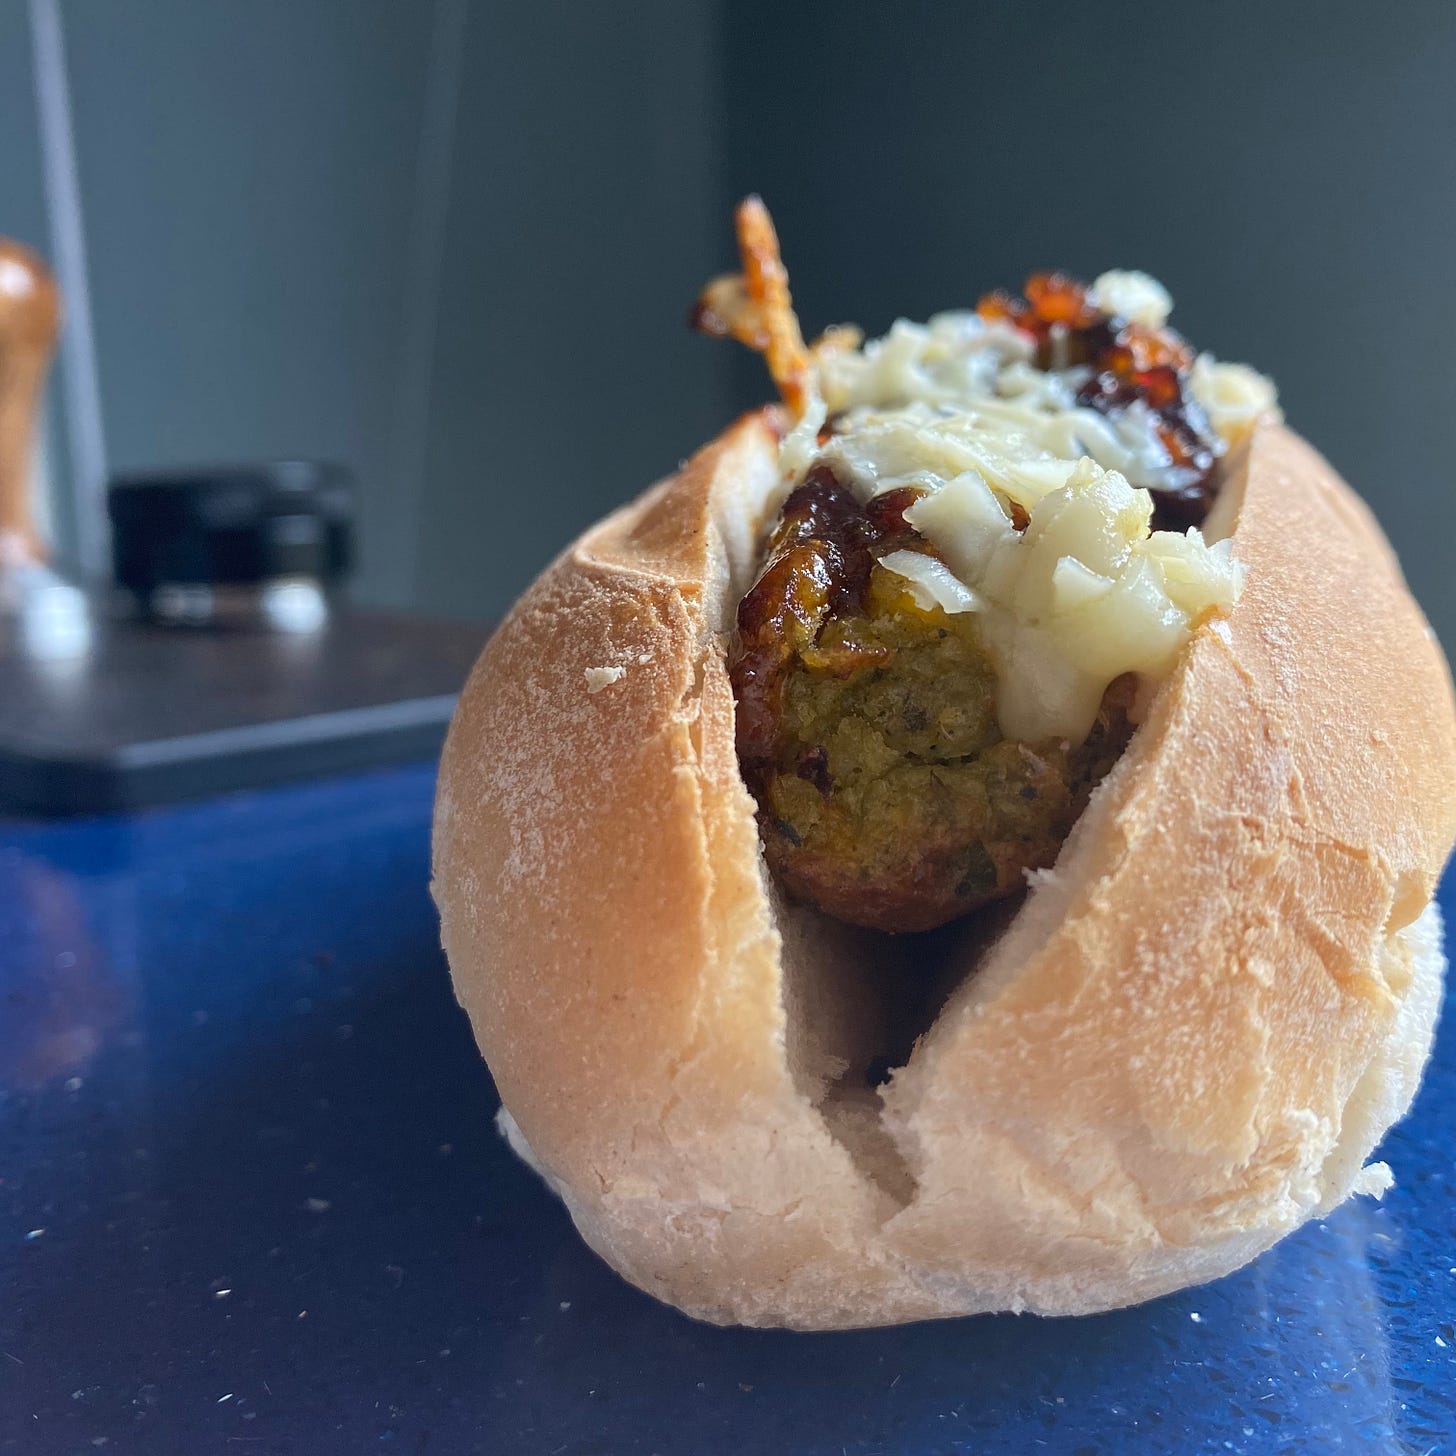 Hot dog roll filled with vegetarian sausage, and topped with onion chutney and grated cheese. Hot dog roll is placed on top of a blue quartz worktop, a grey wall behind.